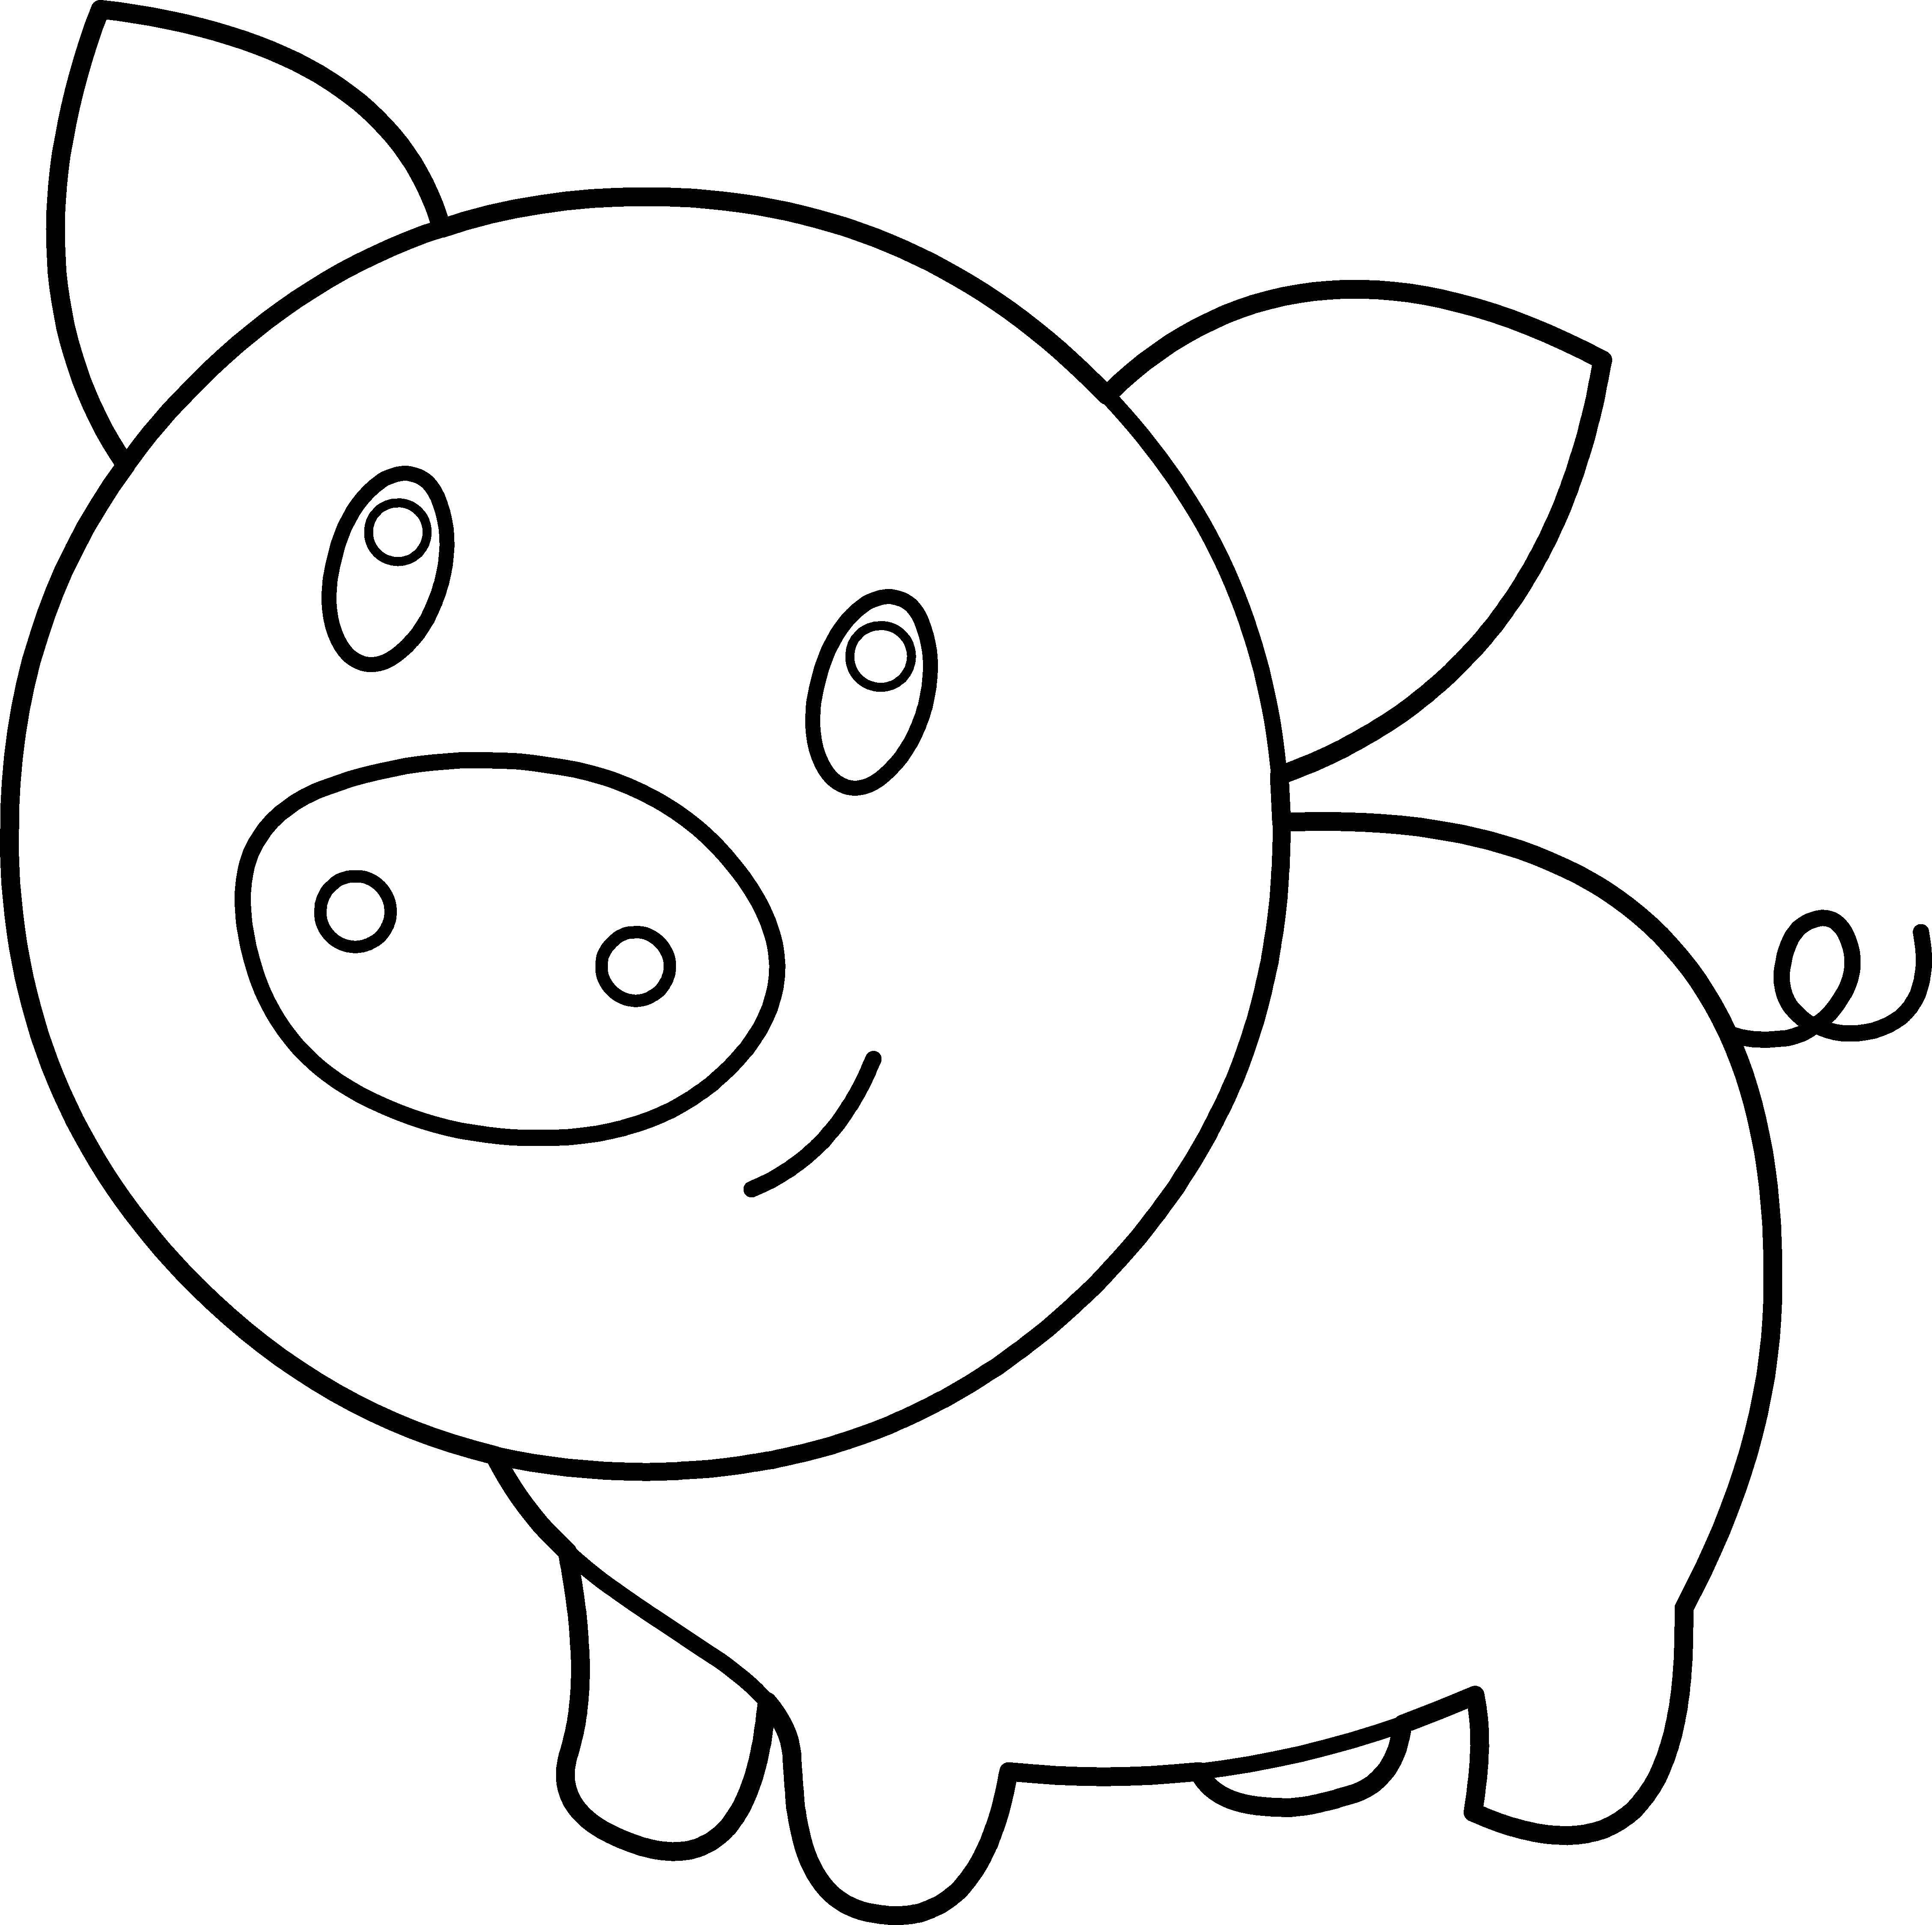 Coloring The outline of a pig. Category The outline of a pig to cut. Tags:  pig, contour, ears, tail.